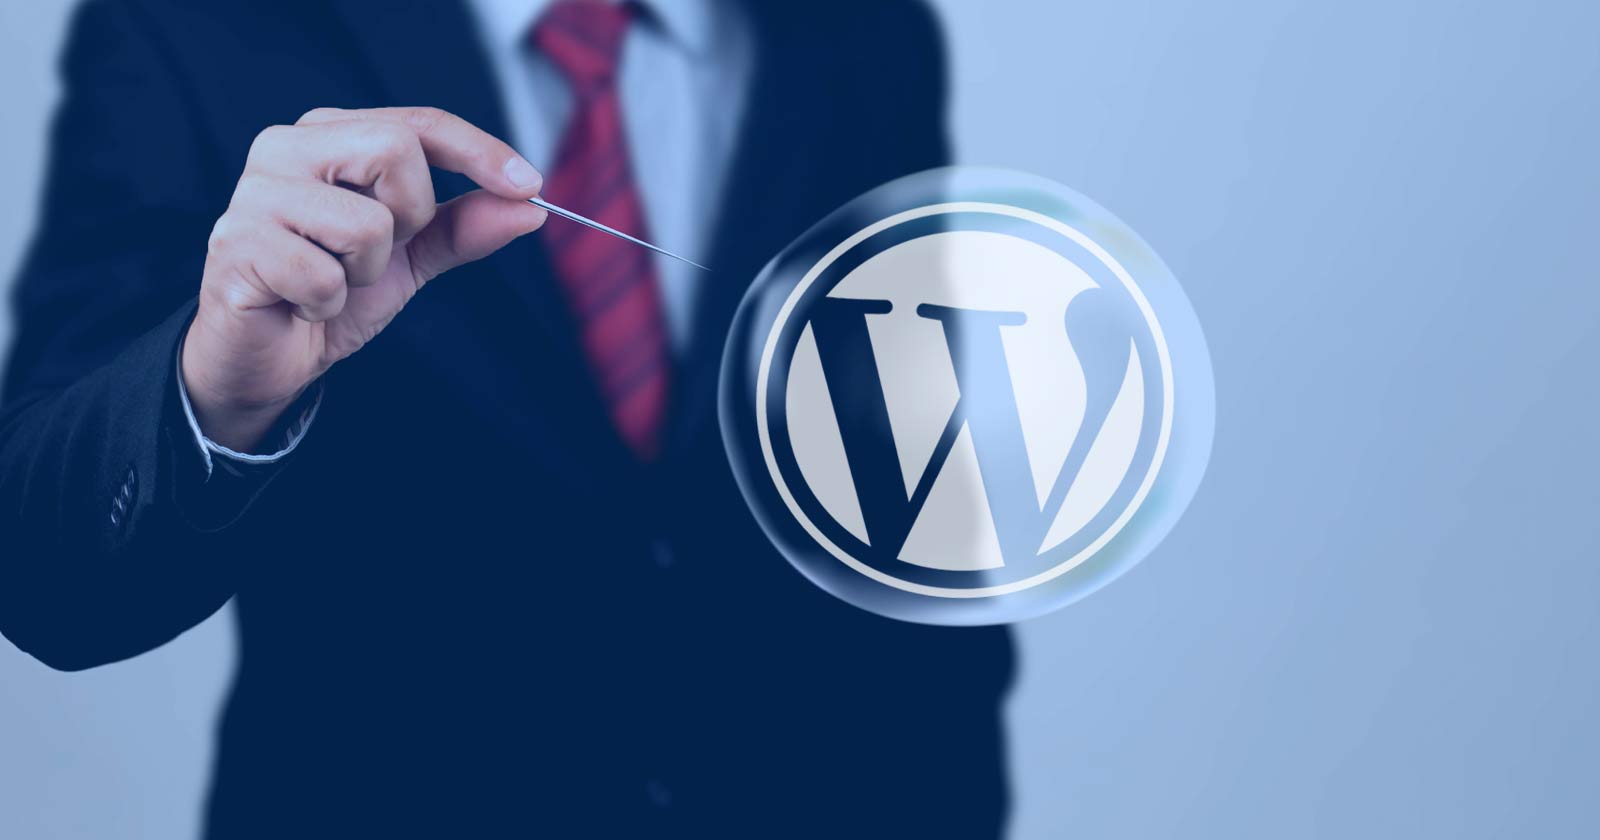 wordpress logo in a bubble with a pin about to pop it